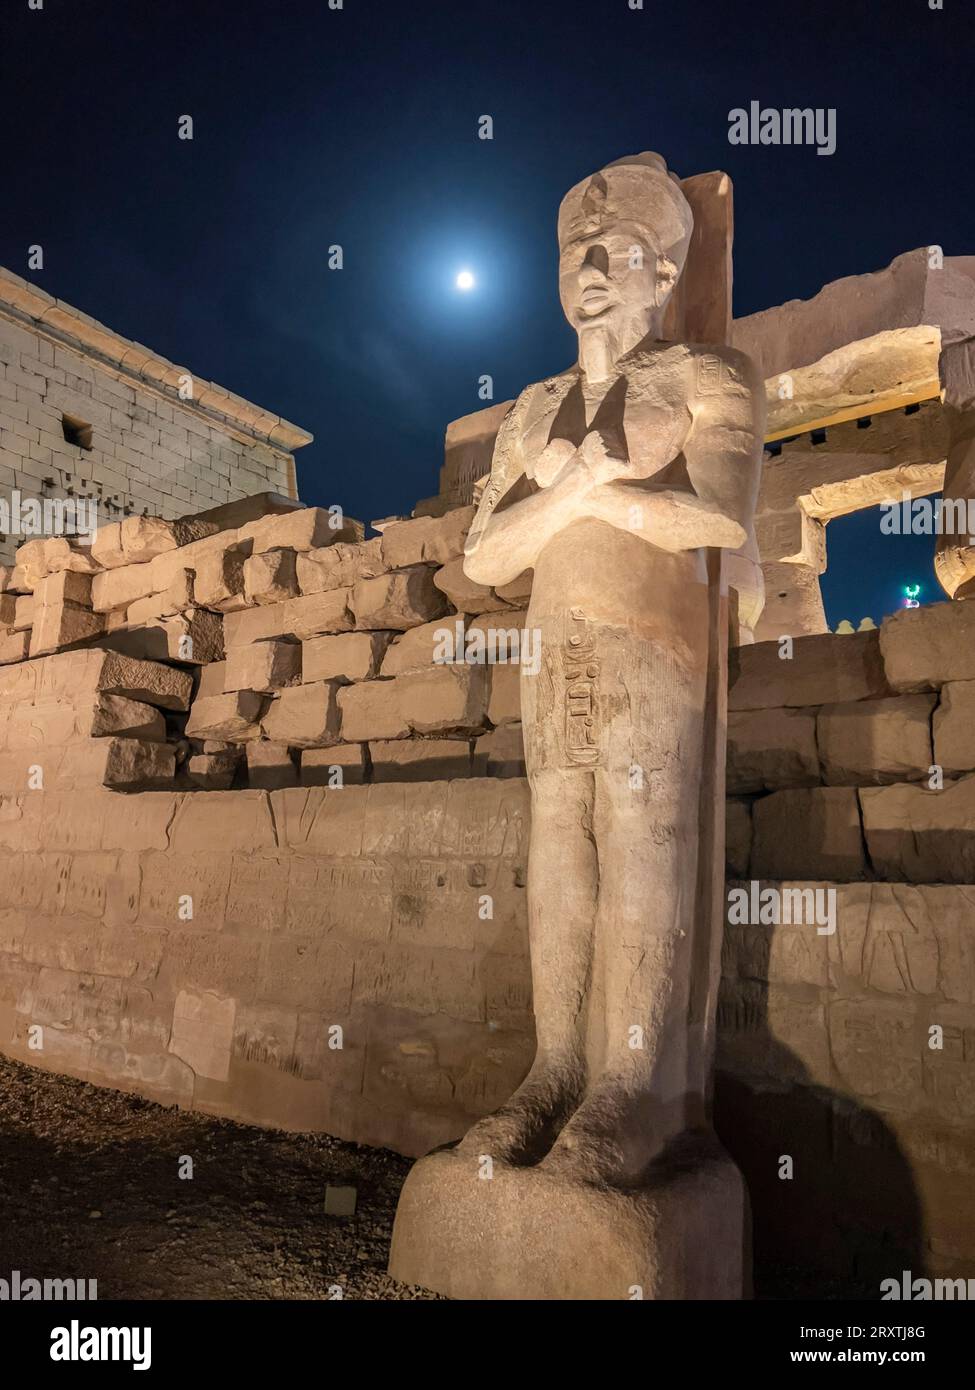 The Luxor Temple at night, under a full moon, constructed approximately 1400 BCE, UNESCO World Heritage Site, Luxor, Thebes Stock Photo